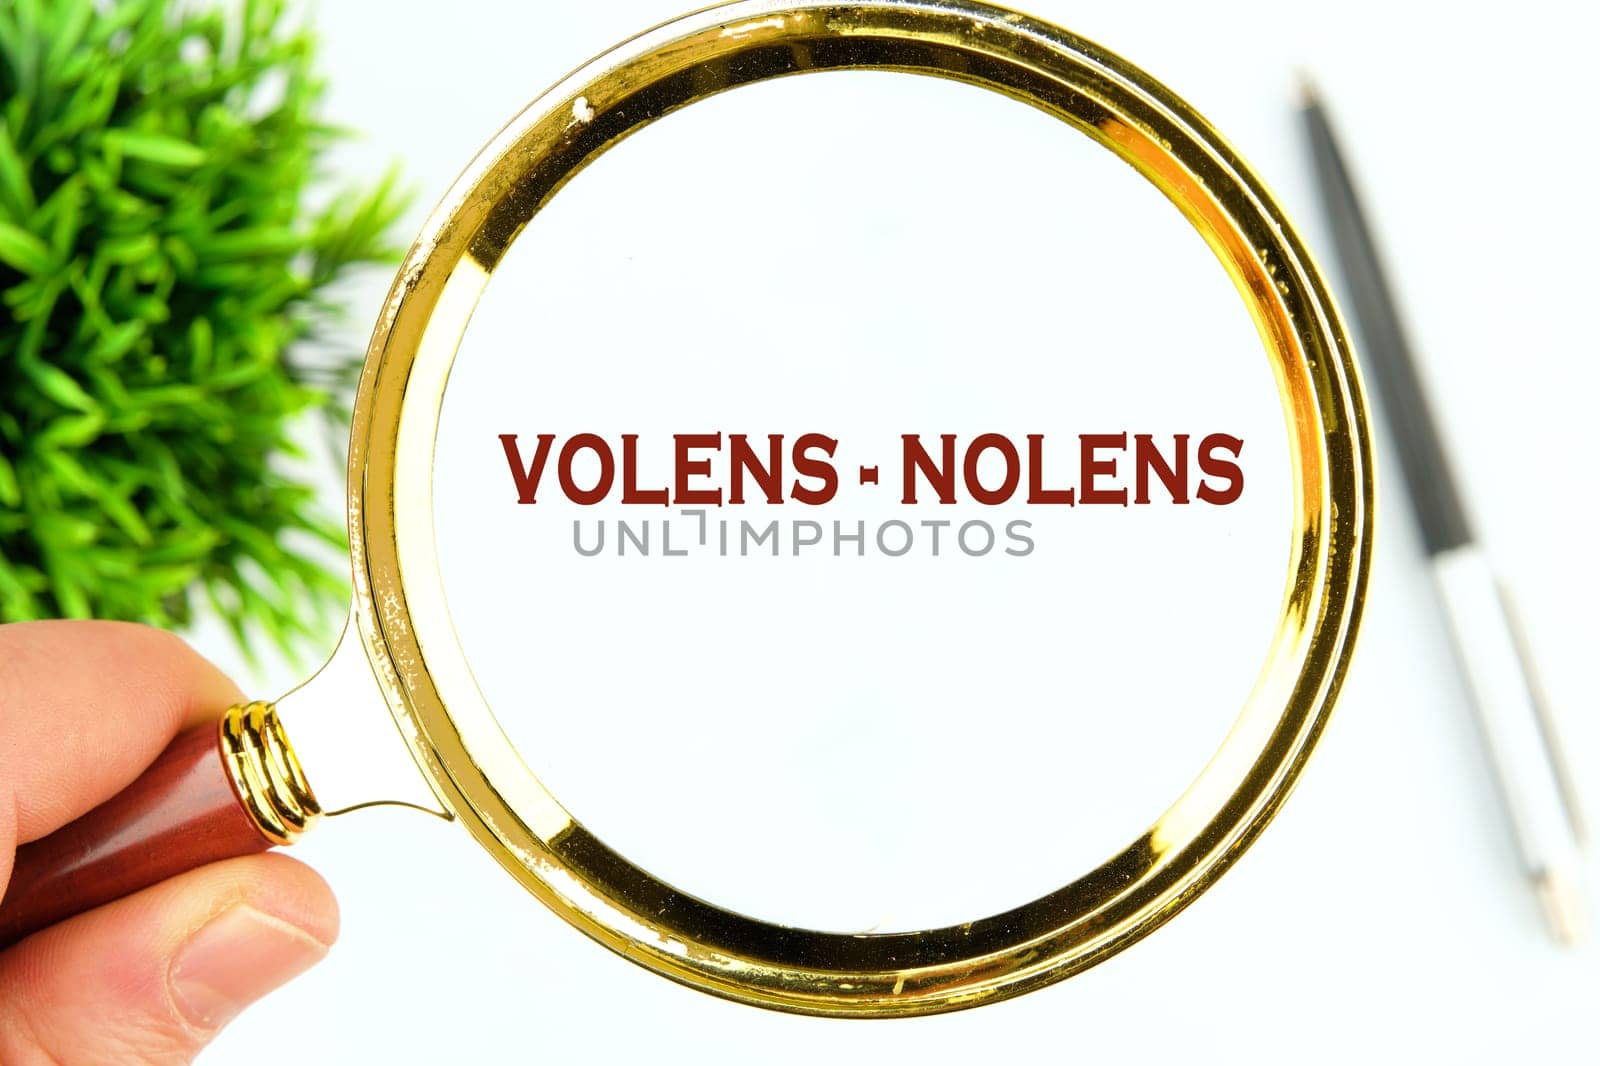 Willy - nilly latin expression volens-nolens (willing or unwilling) written through a magnifying glass on a white background